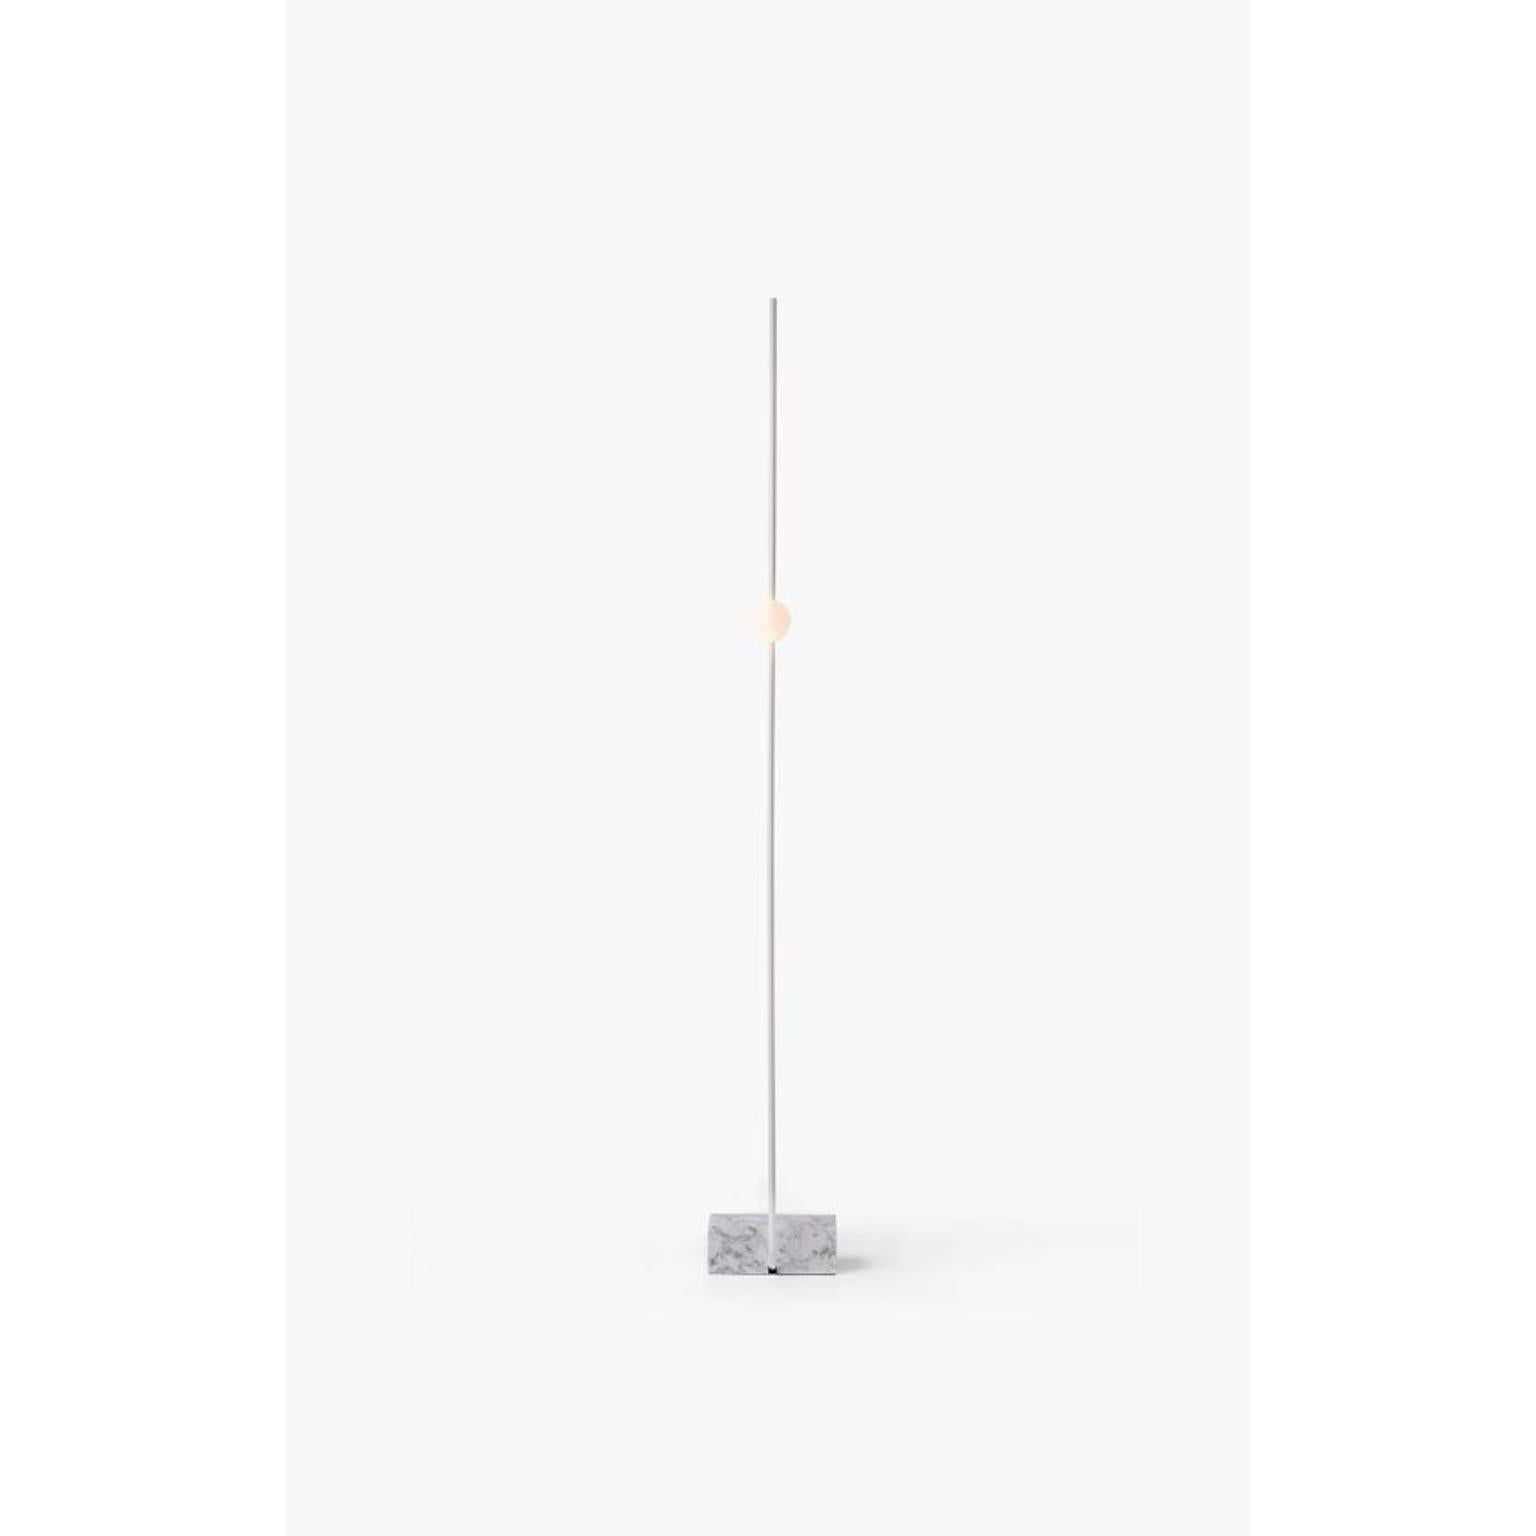 White Adobe Floor Lamp by Wentz
Dimensions: D 32 x W 24 x H 180 cm
Materials: Steel, Marble, Blown Glass.
Also available in different colors: Black + Carrara Marble, White + Carrara Marble, Sand + Bege Bahia Marble.

Weight: 8,6kg / 19 lbs
LIGHT